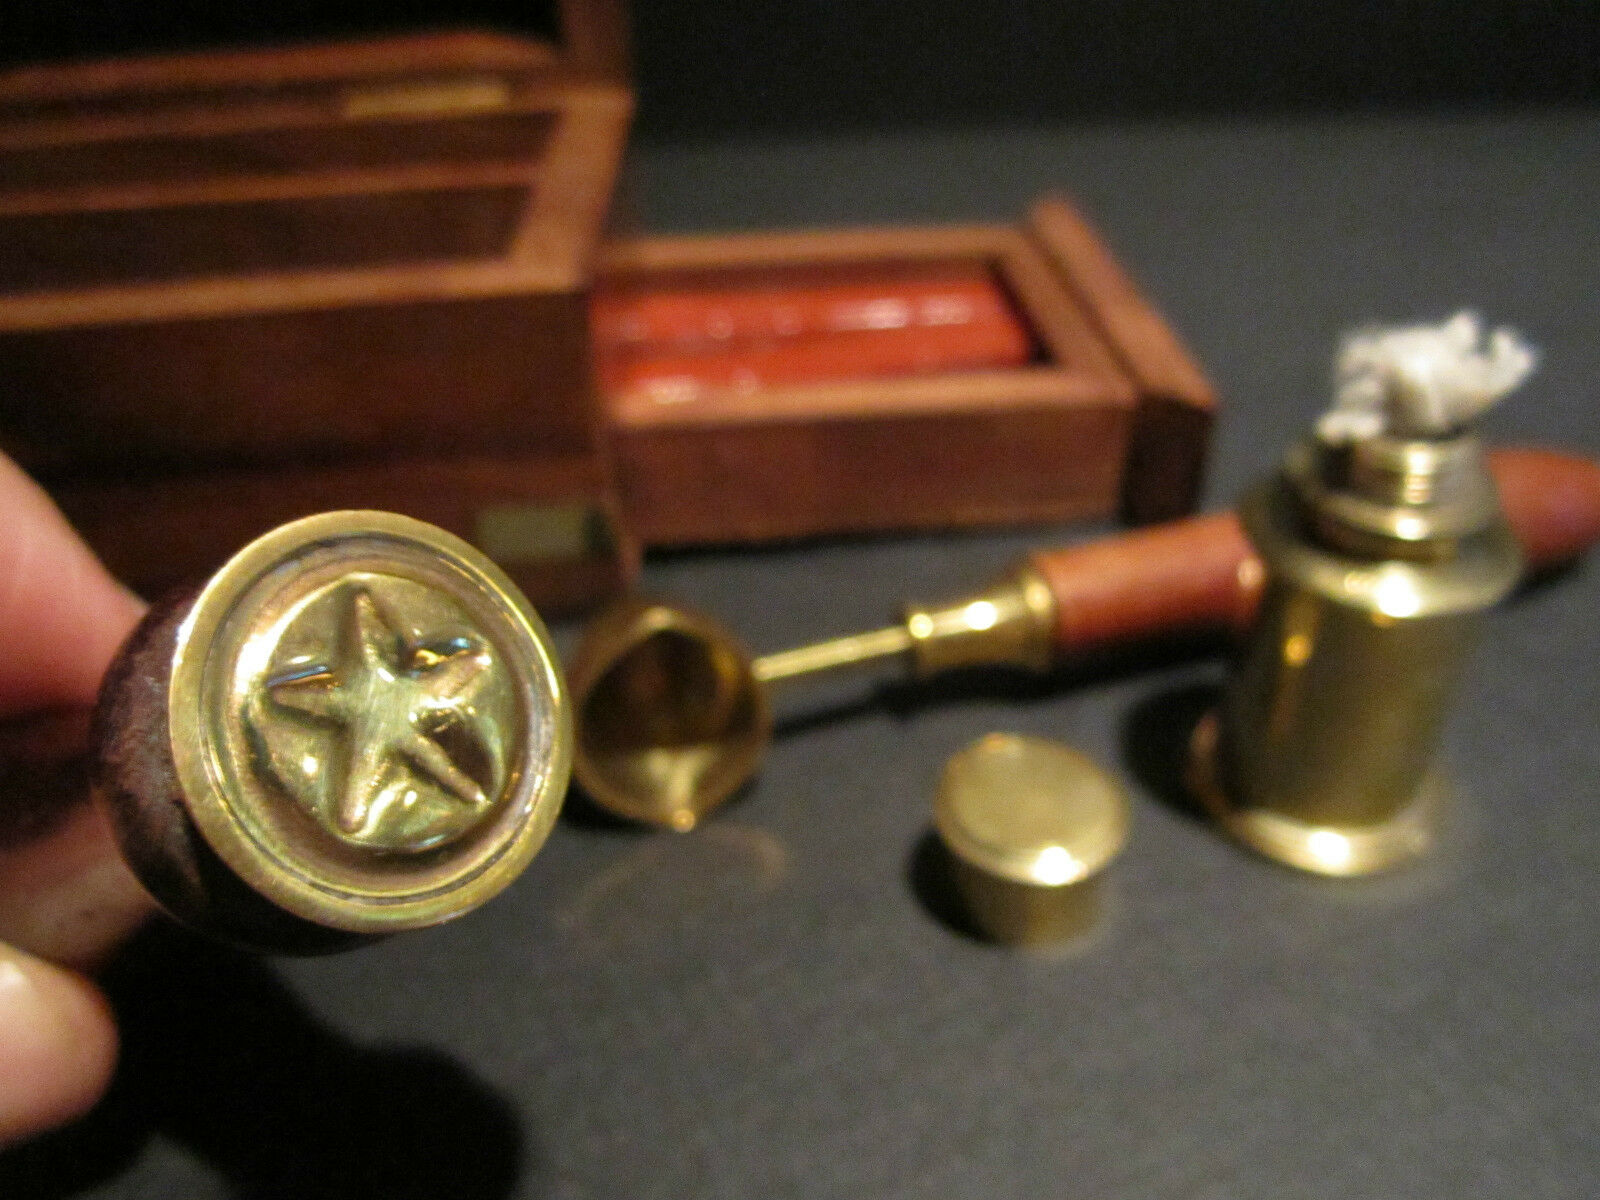 Wax Seal Kit w Burner Spoon & Star Letter Seal Stamp Antique Vintage Style - Early Home Decor